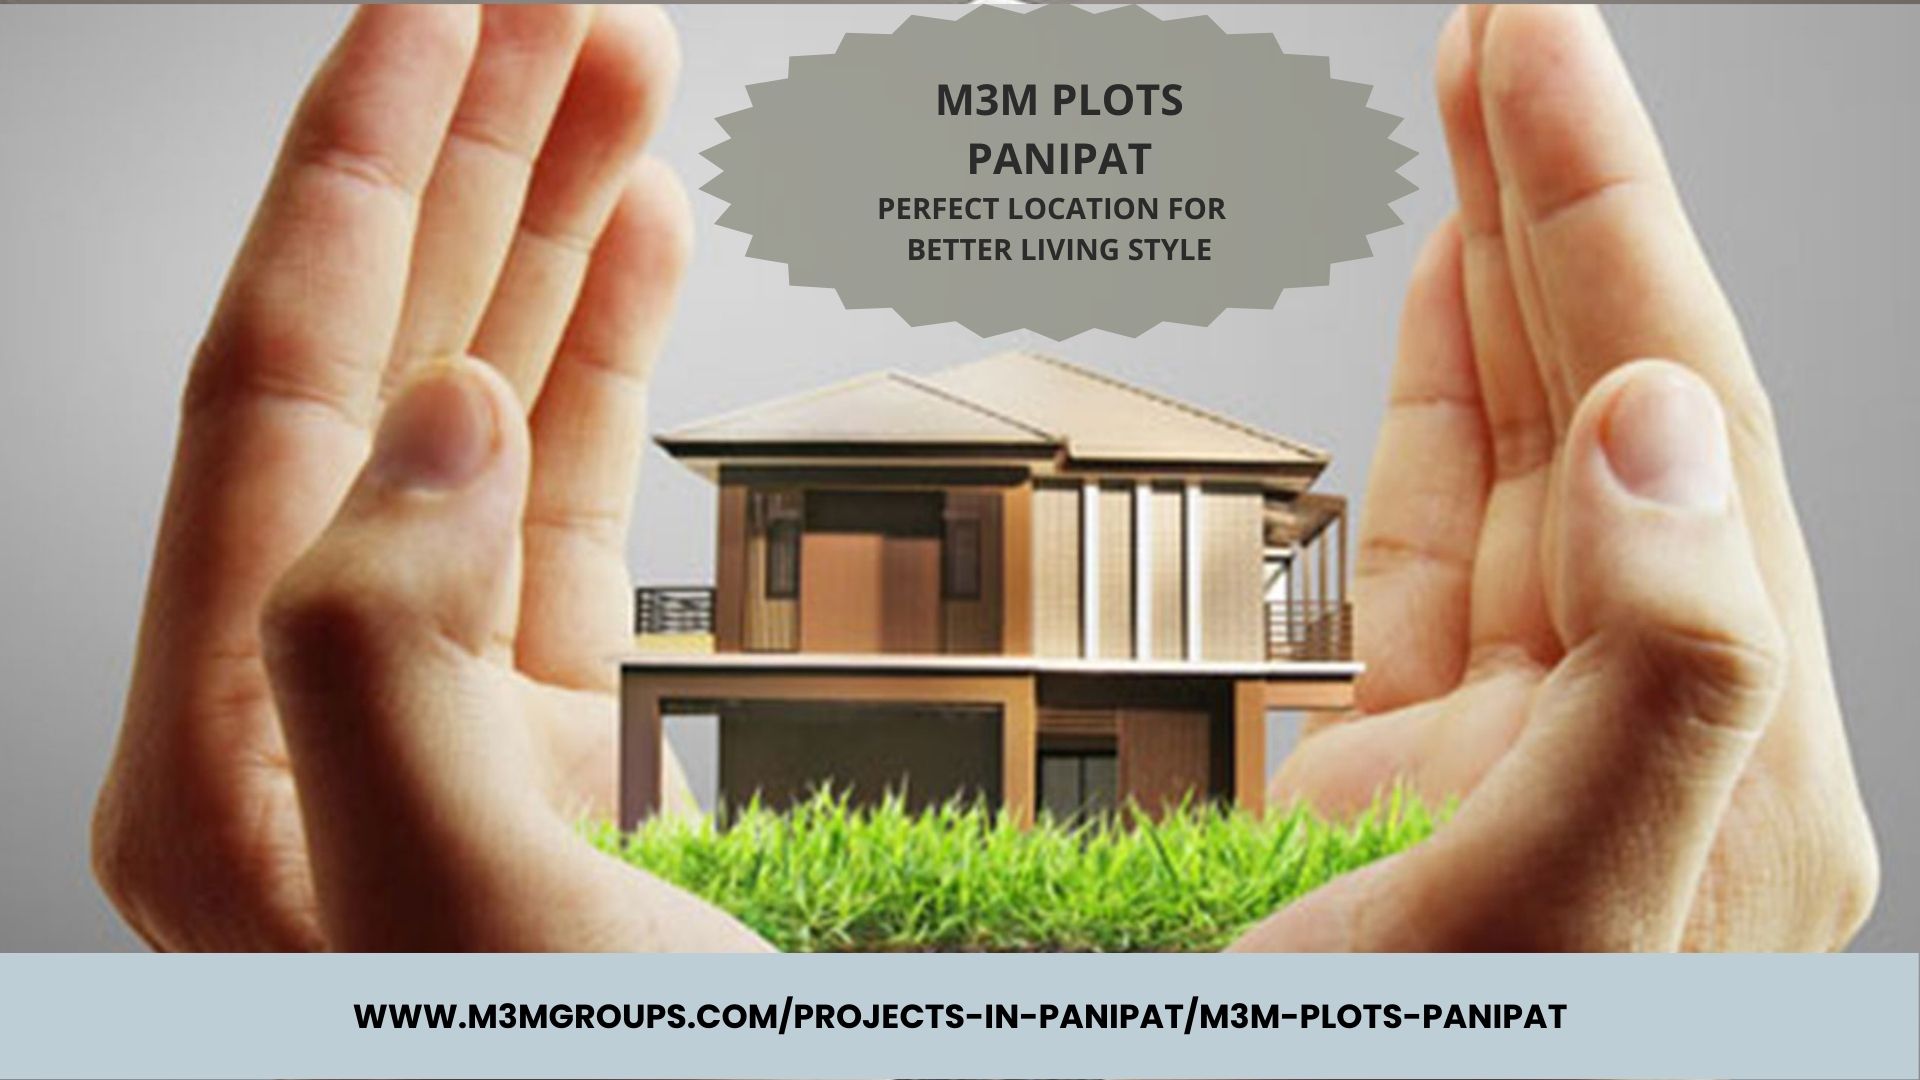 M3M Plots Panipat | Live Life To The Fullest On A Well-Planned Plotted Project